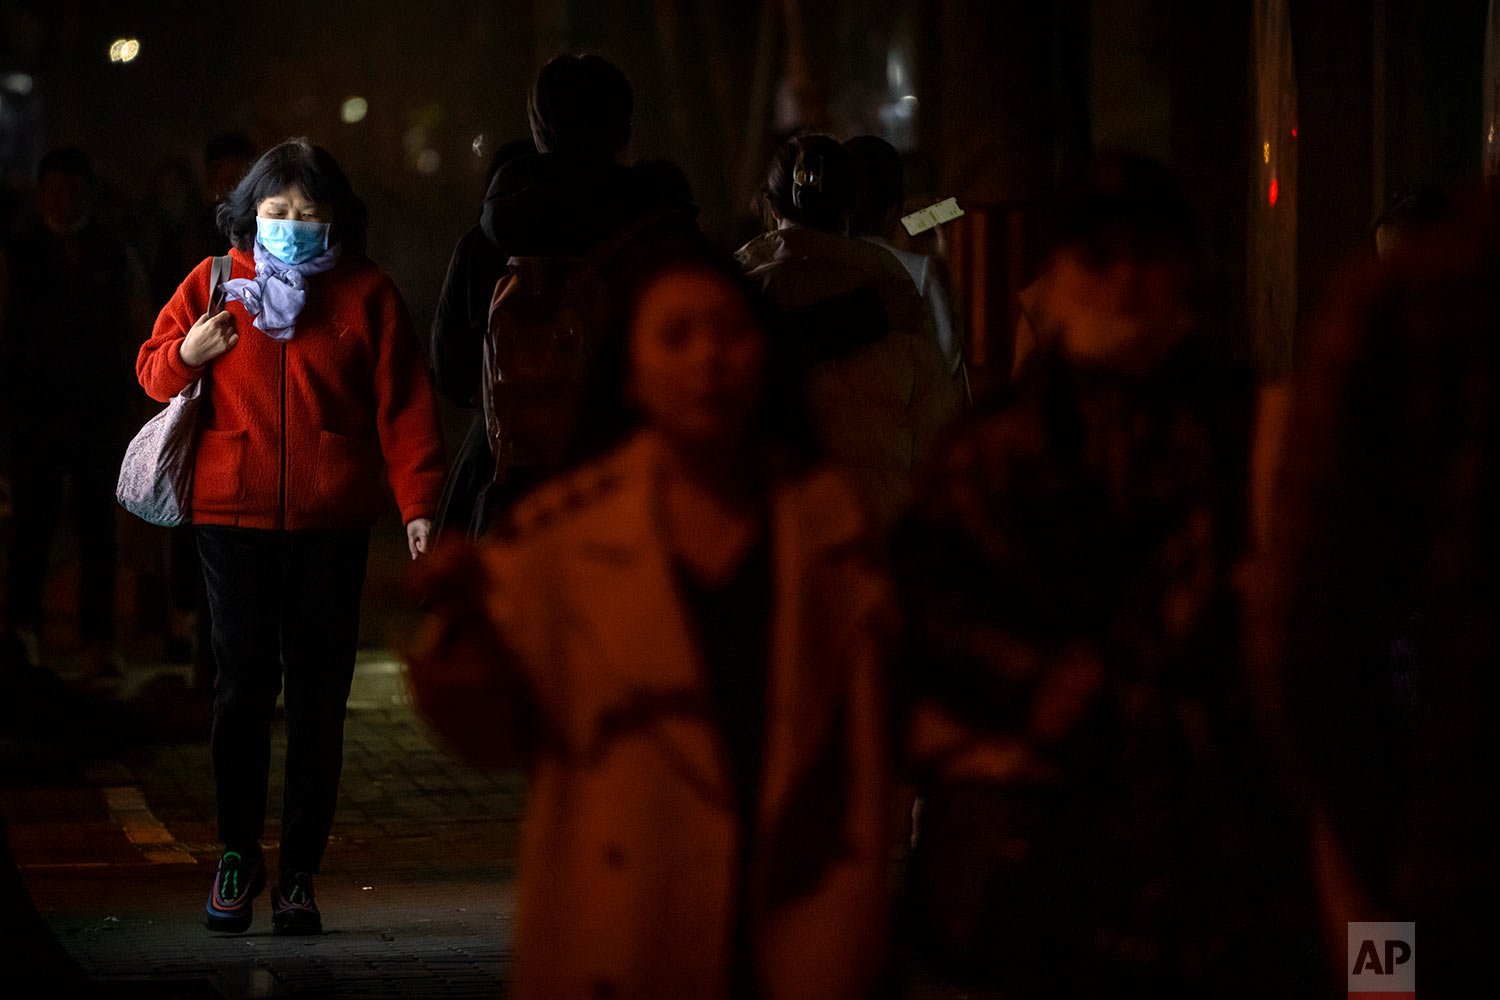  A woman wearing a face mask to protect against COVID-19 walks past a lit advertising billboard along a street in Beijing, Friday, Nov. 5, 2021. (AP Photo/Mark Schiefelbein) 